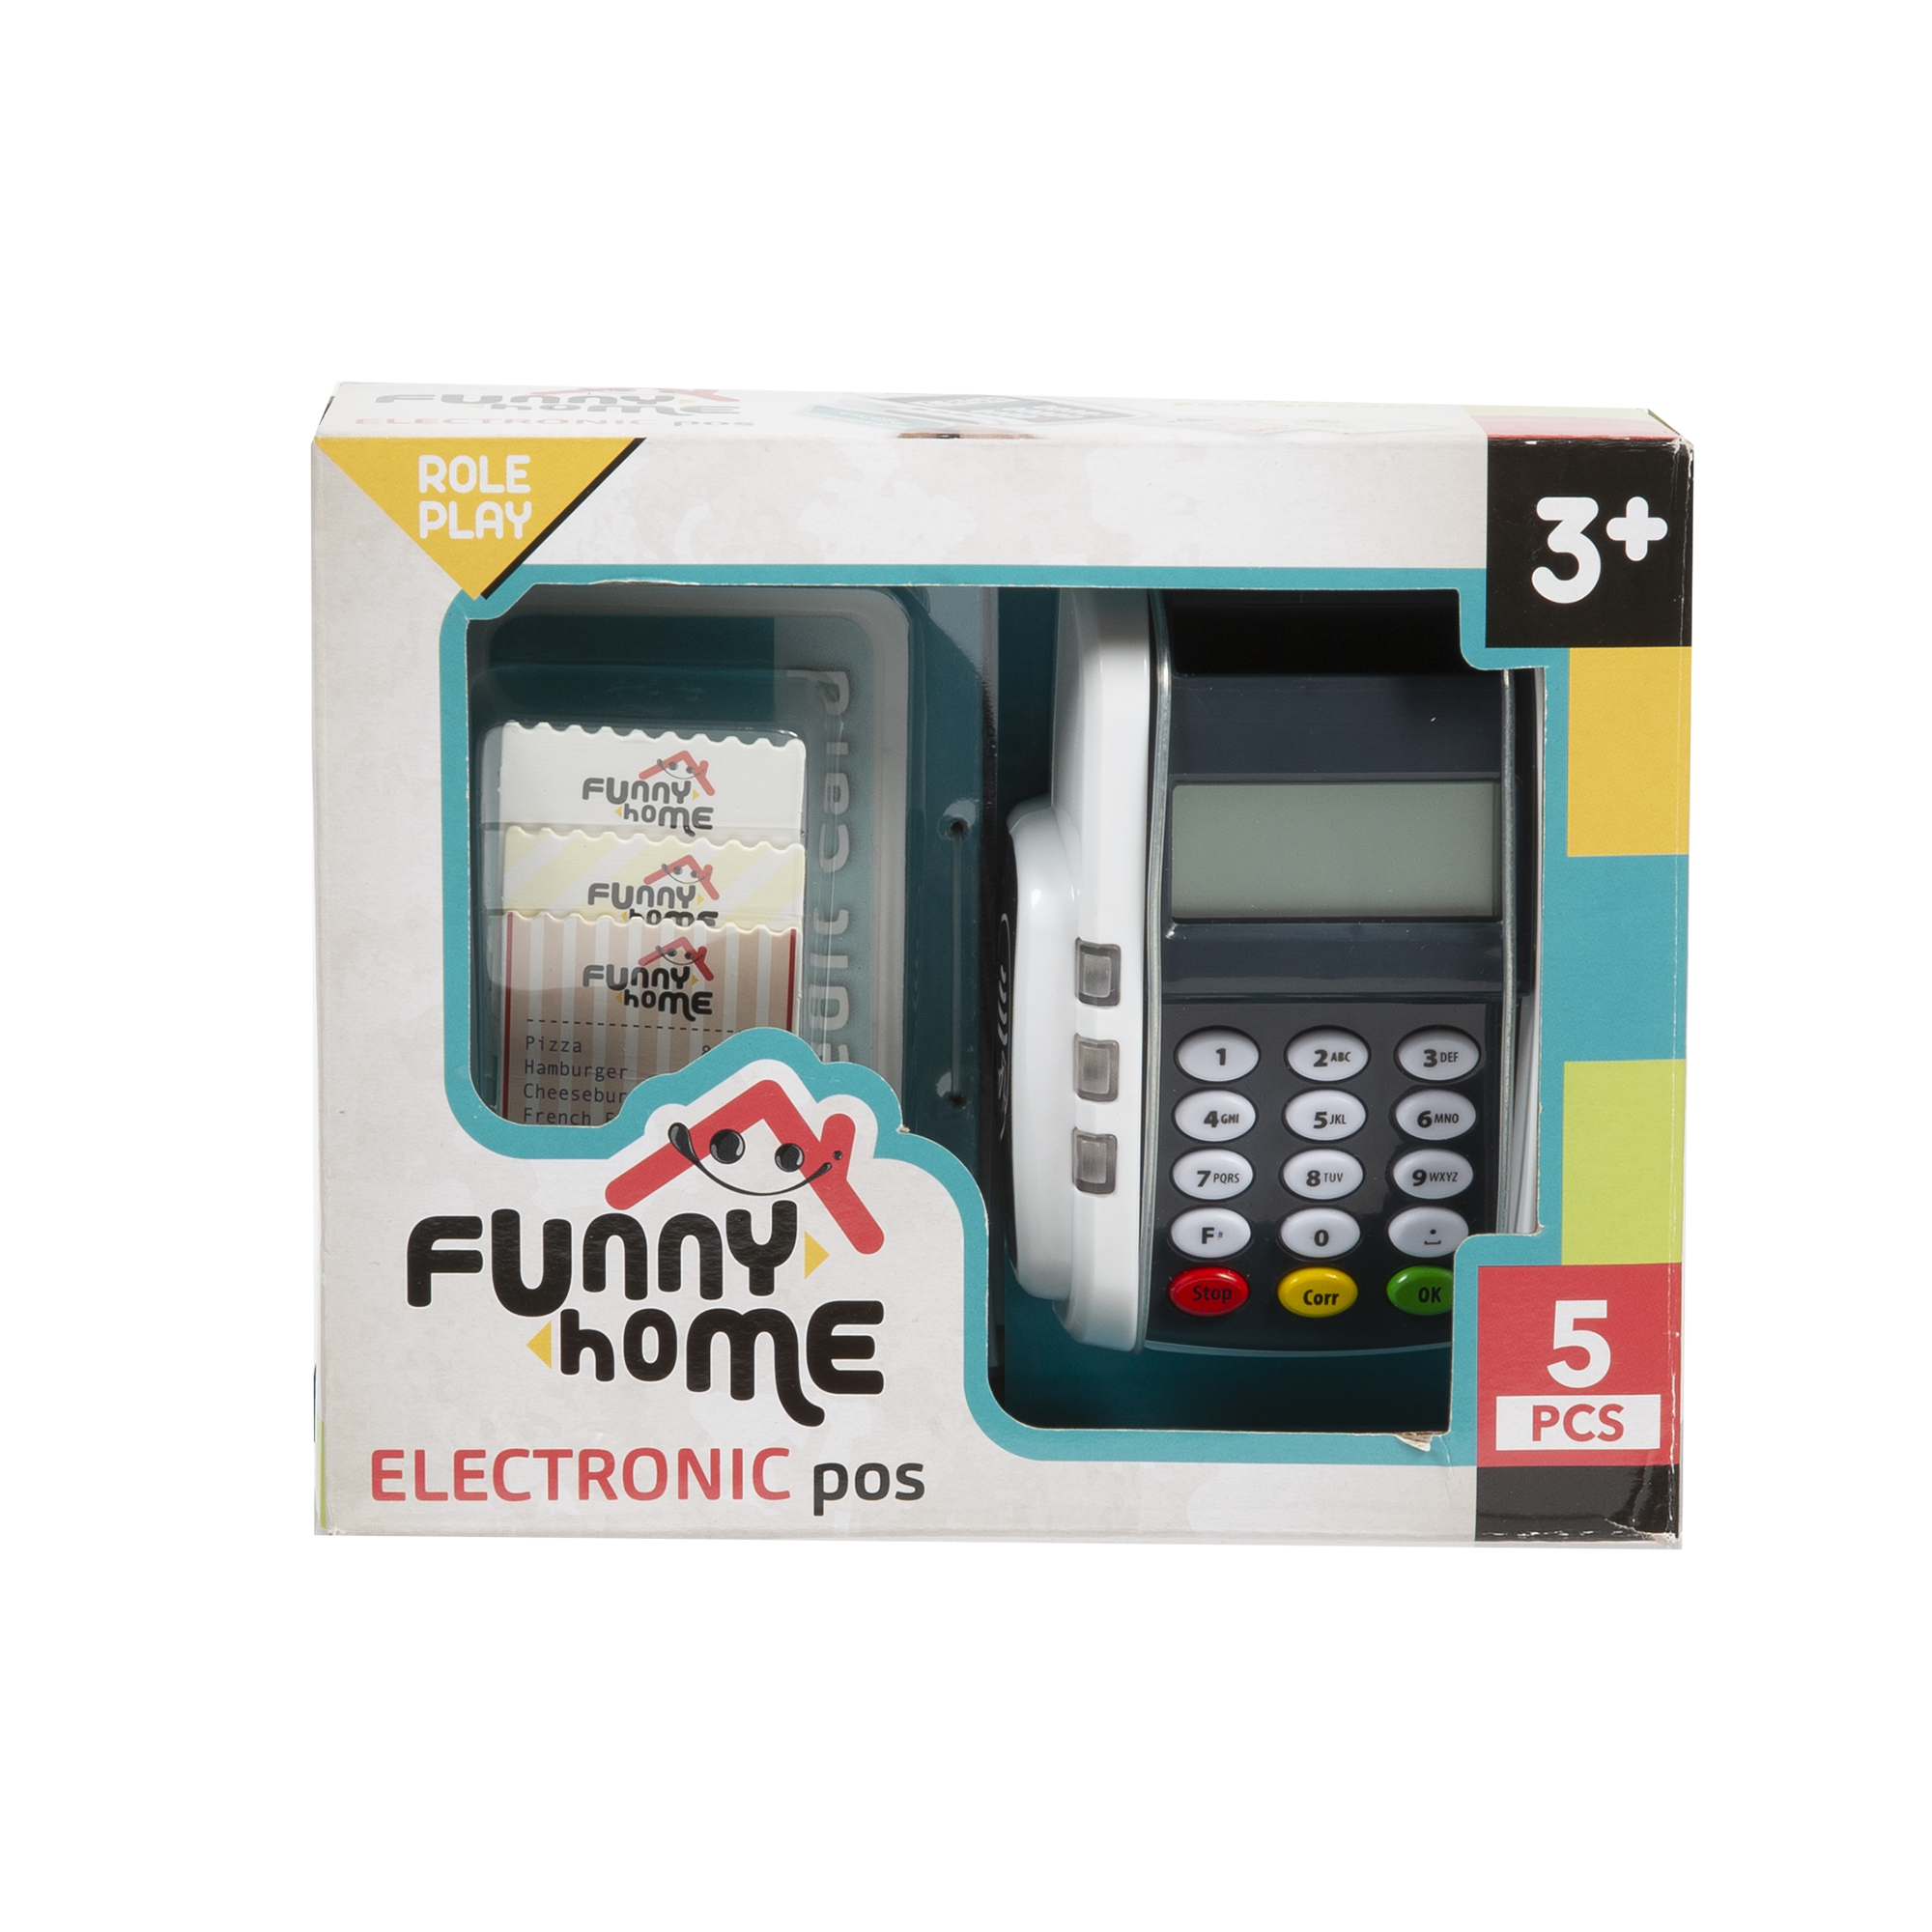 Electronic pos - FUNNY HOME